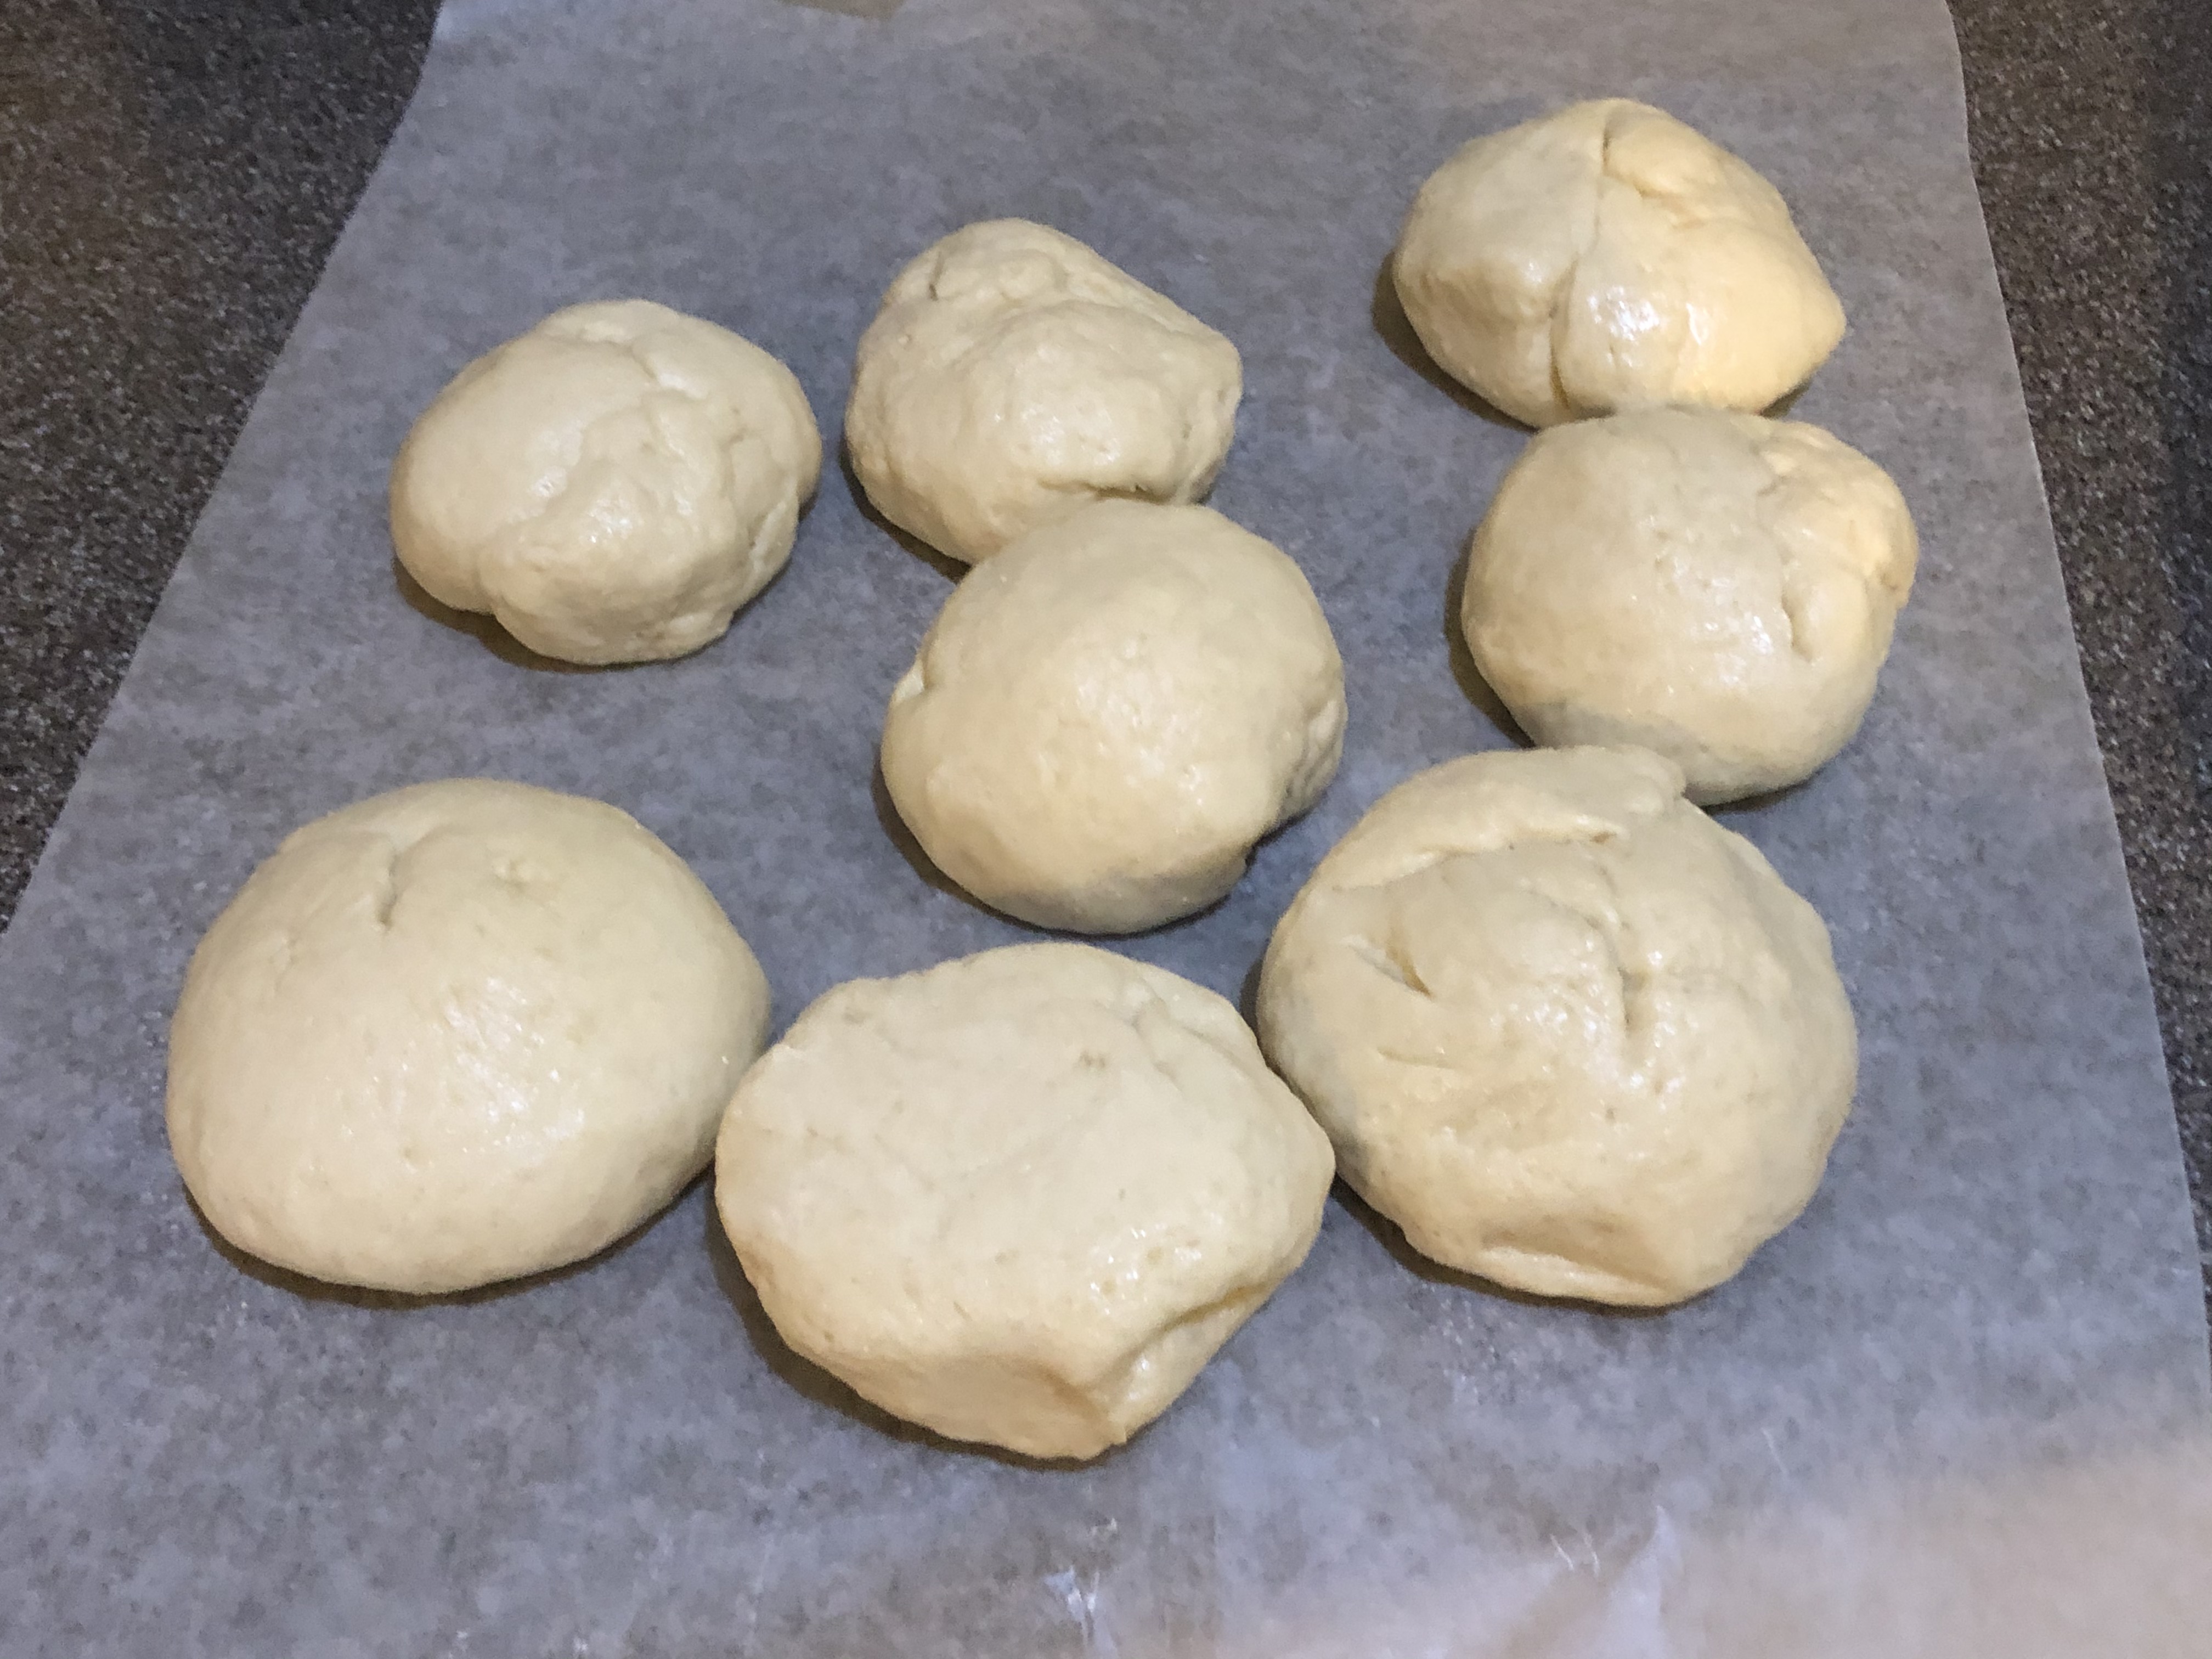 Homemade Bagels - Shaping